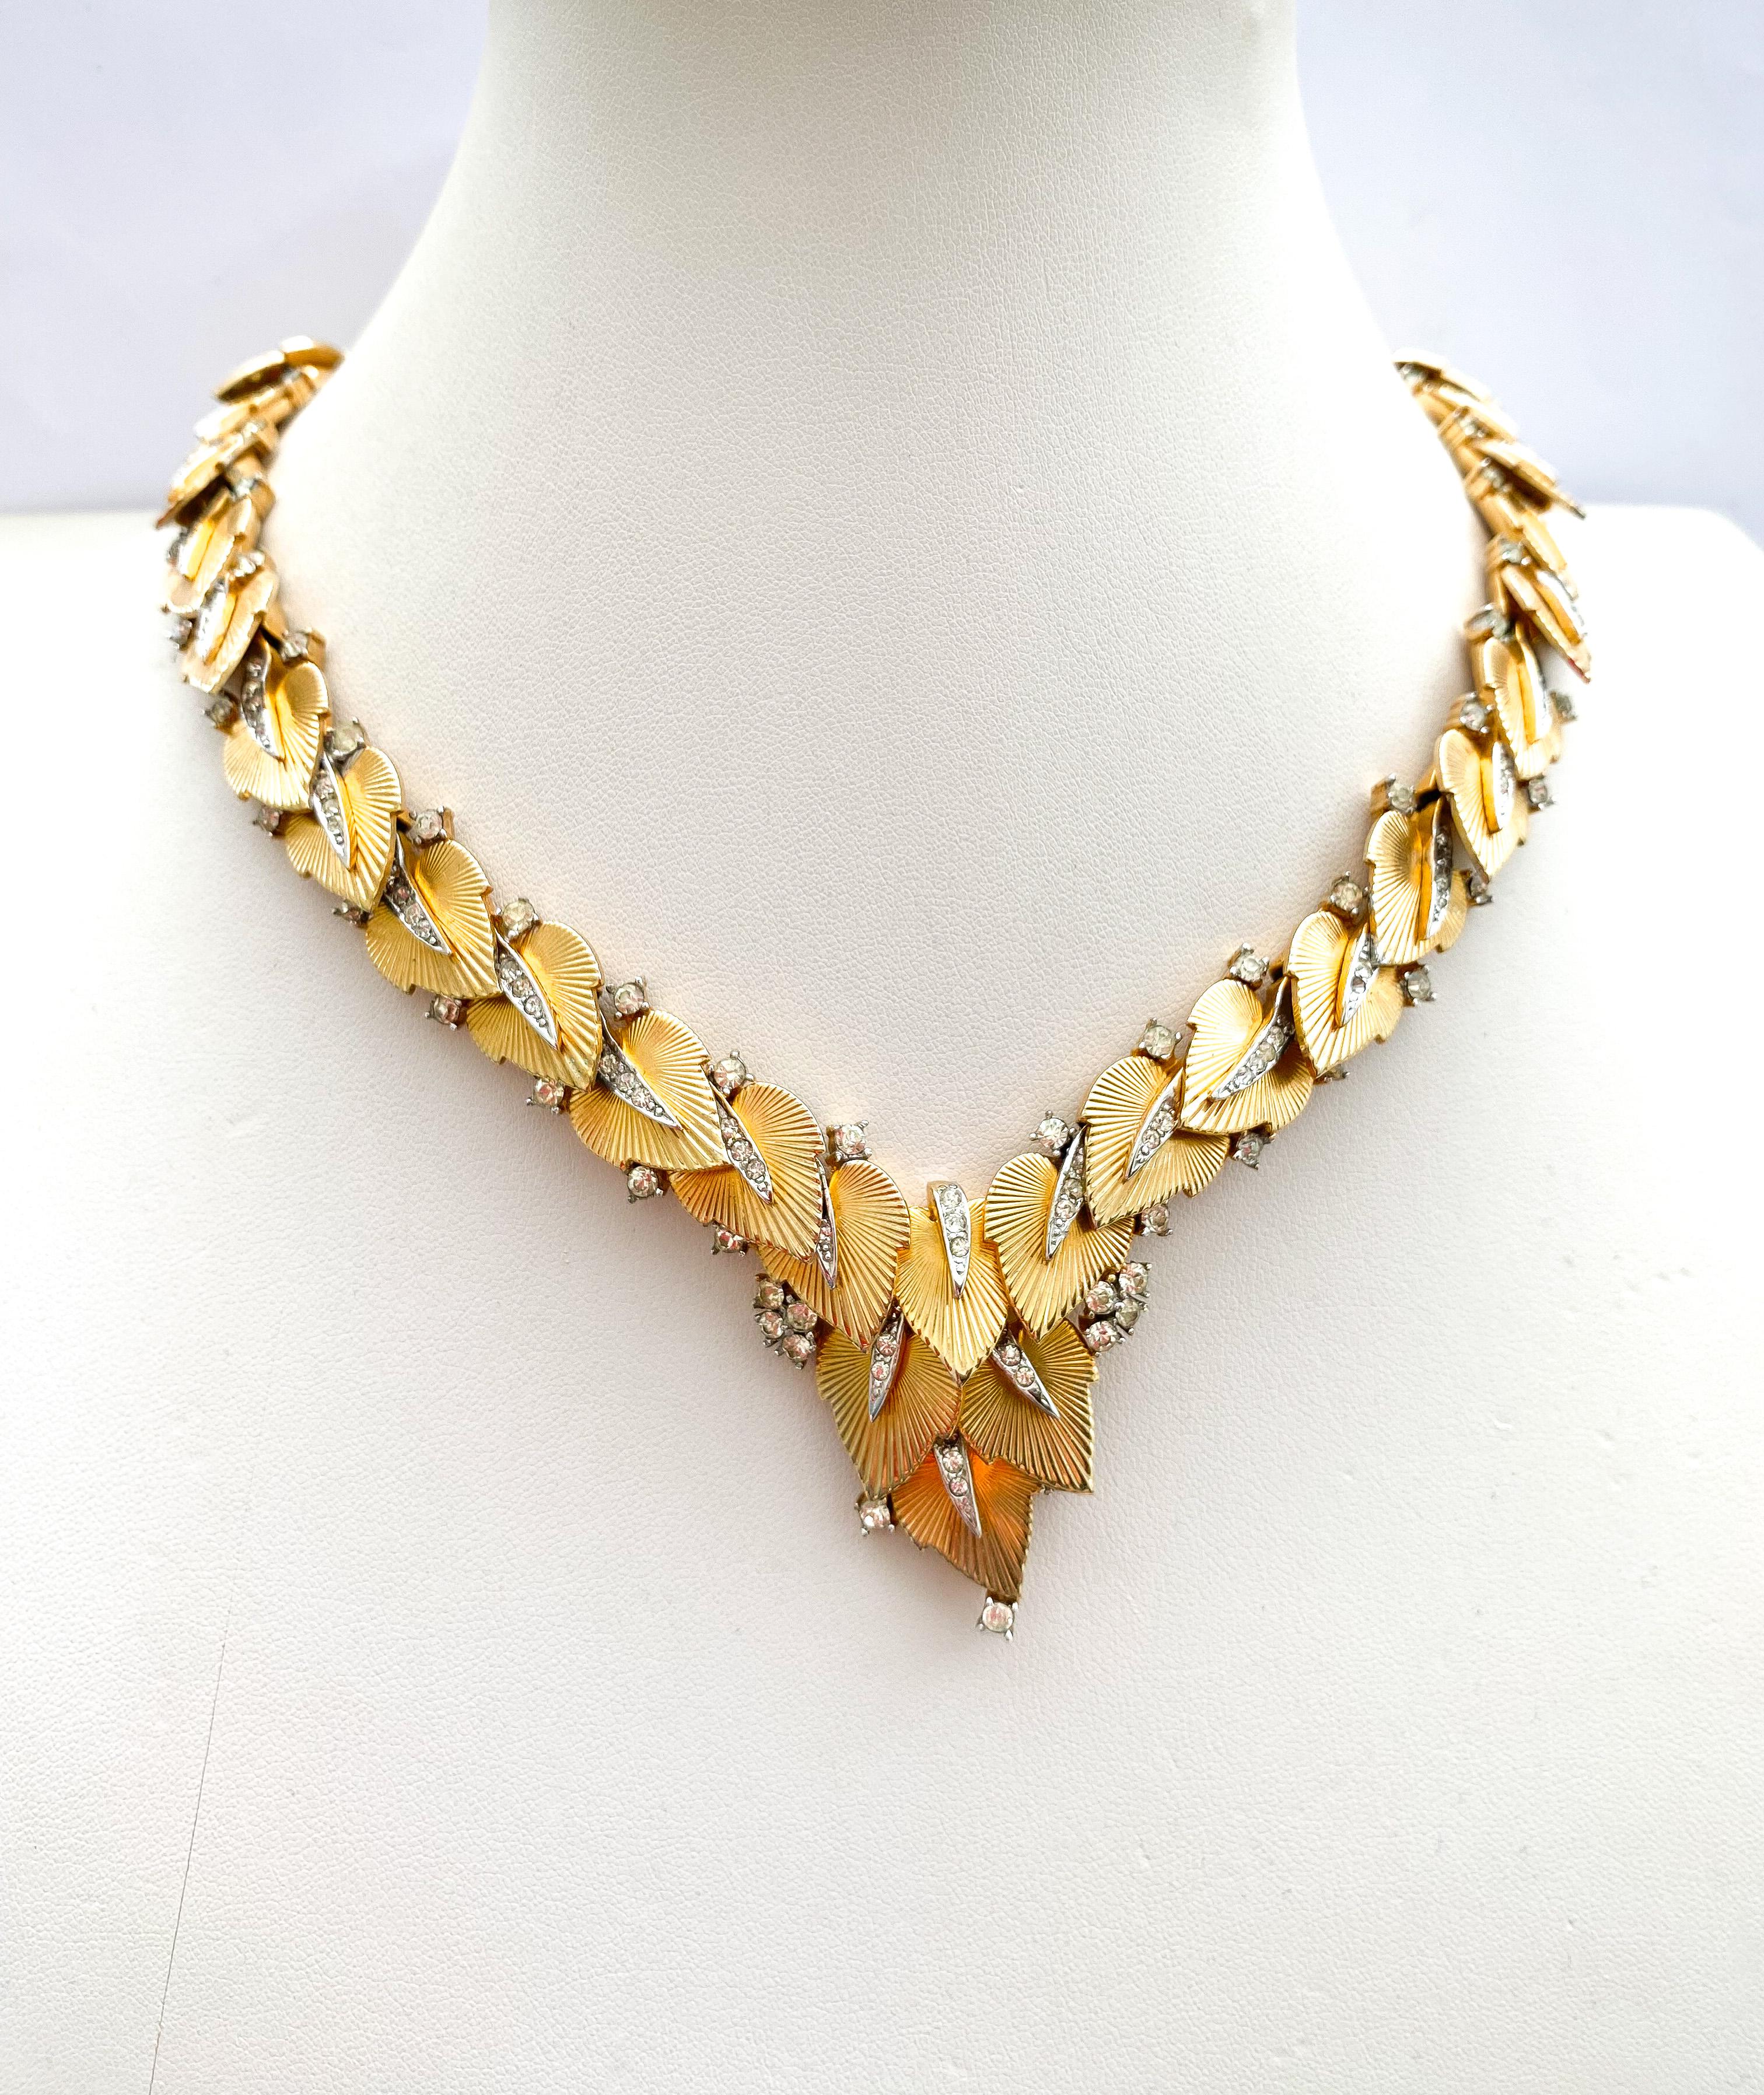 An exquisitely designed and finely crafted gilt metal and clear paste necklace designed by Marcel Boucher in the 1960s. Classic and elegant, this is Boucher at his very best, employing his deep knowledge of the design and construction of real